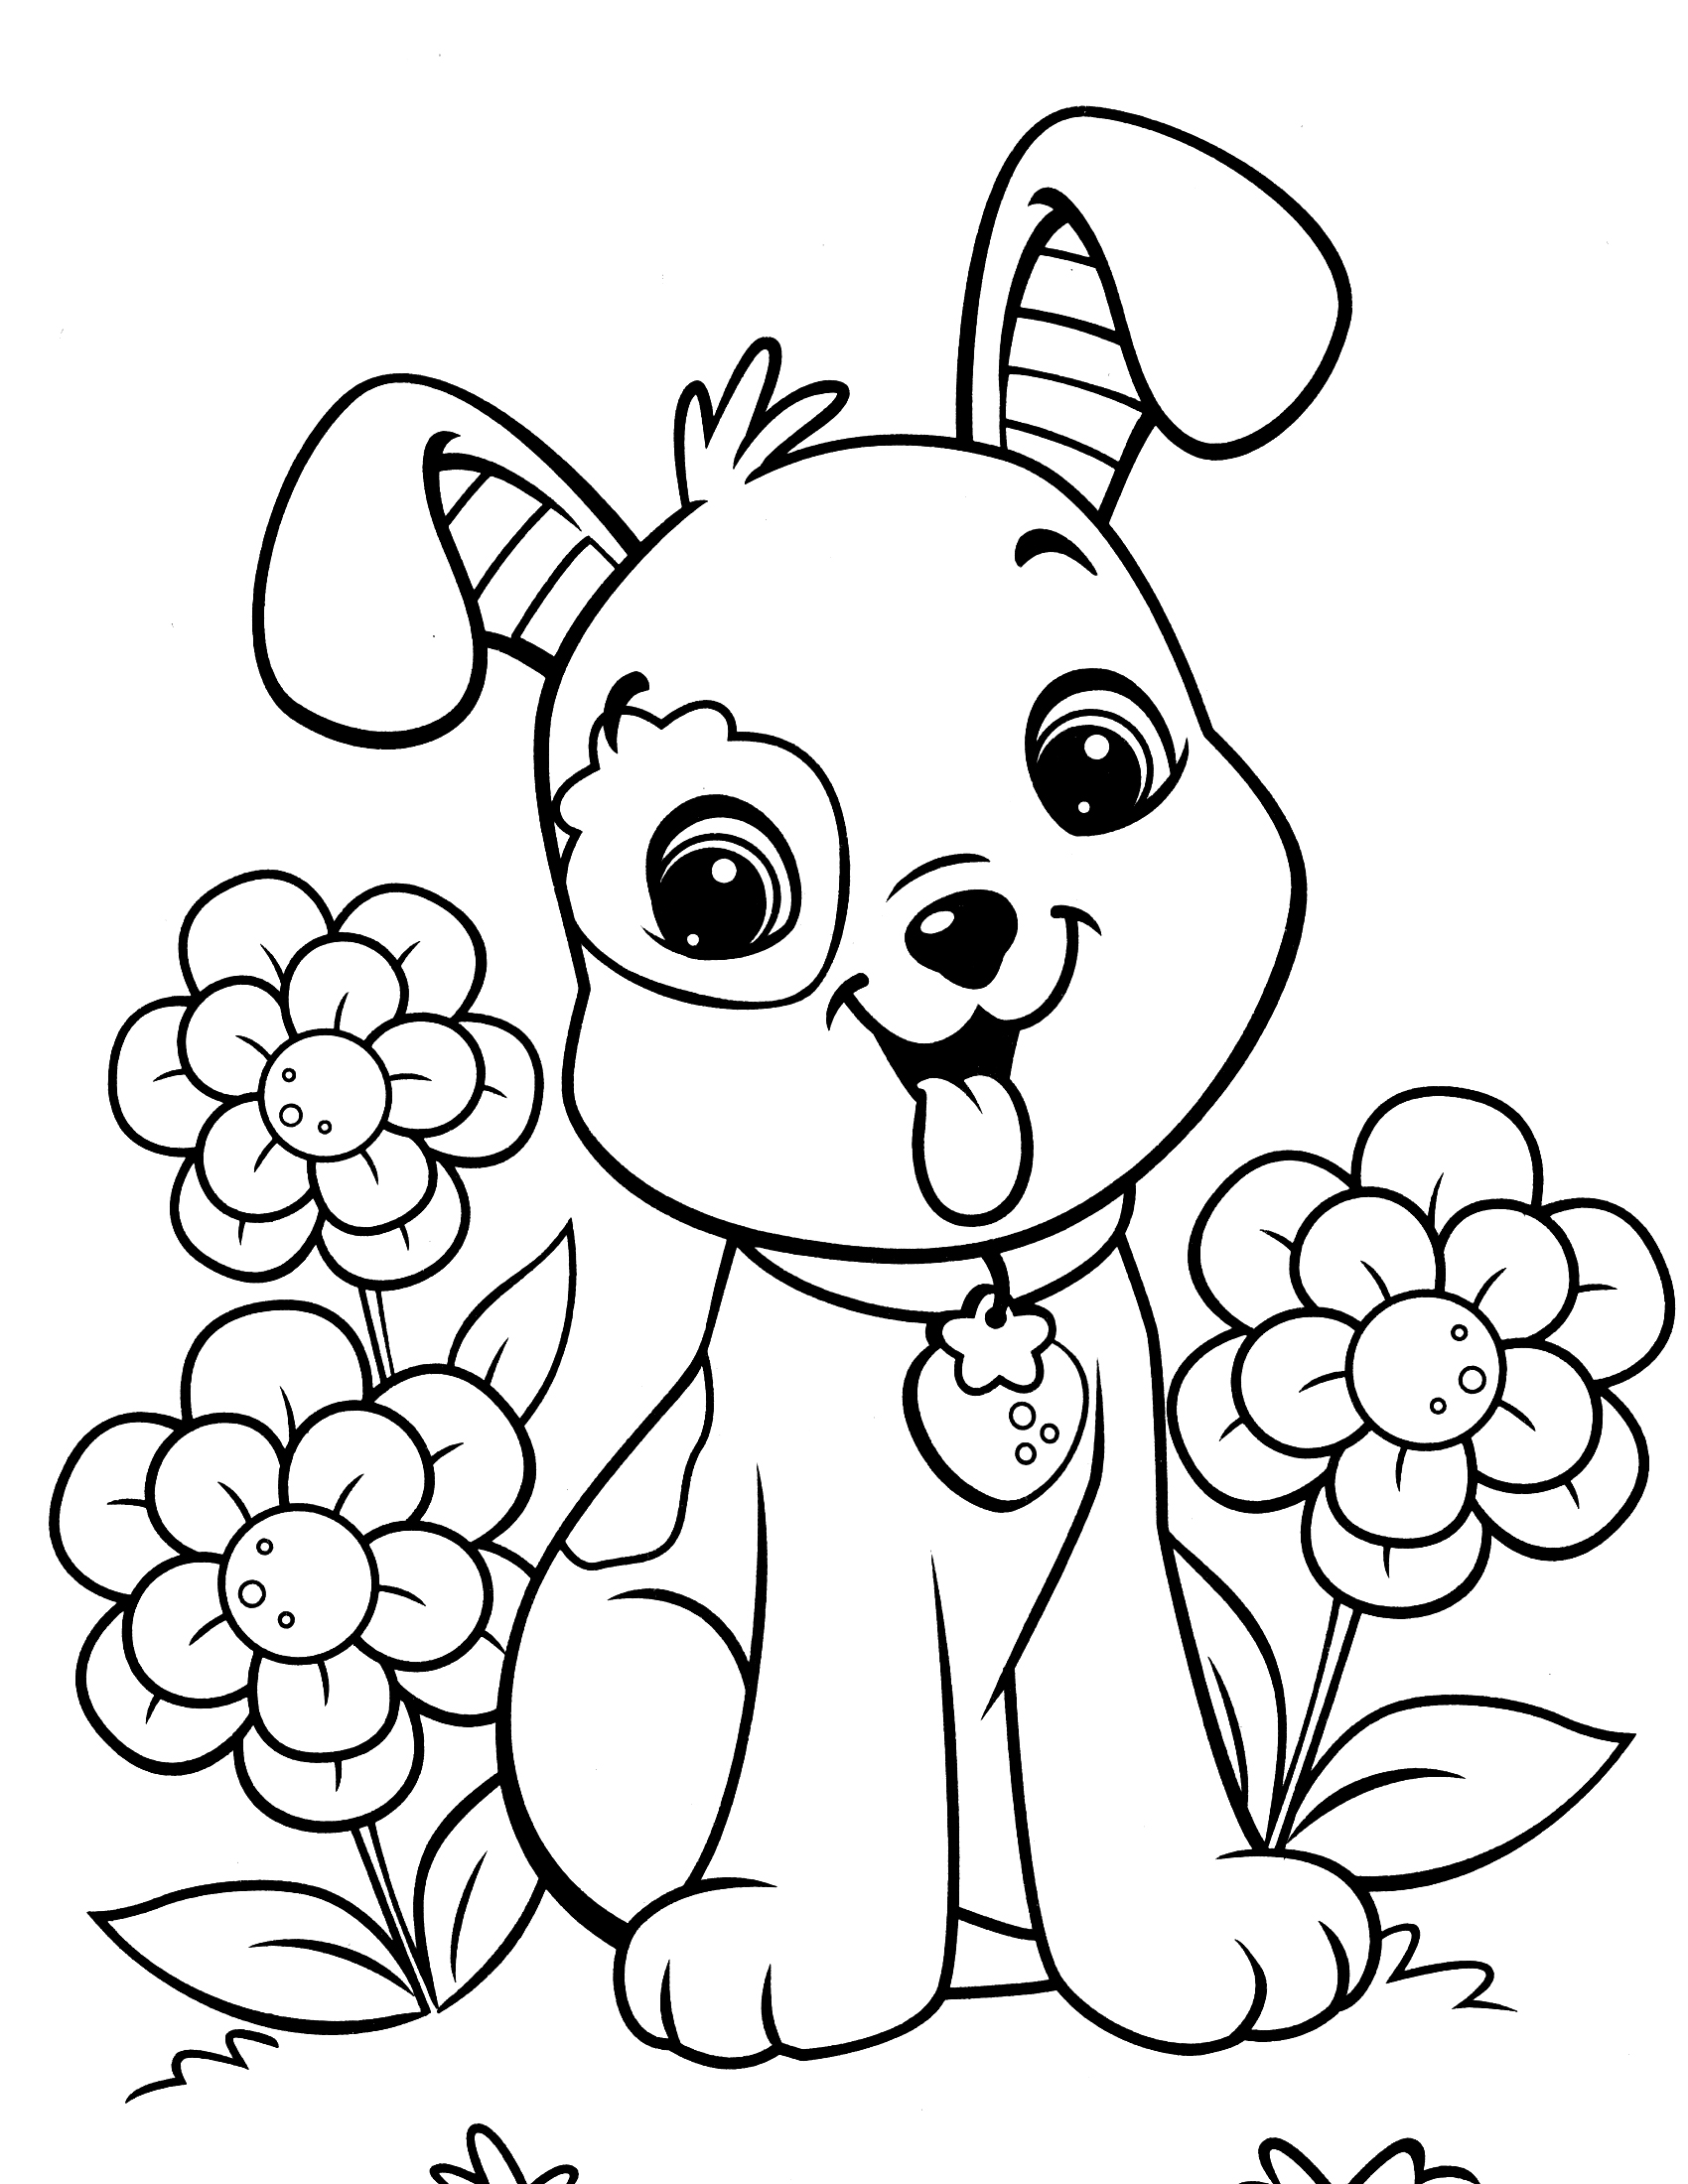 Puppy Coloring Sheets 8